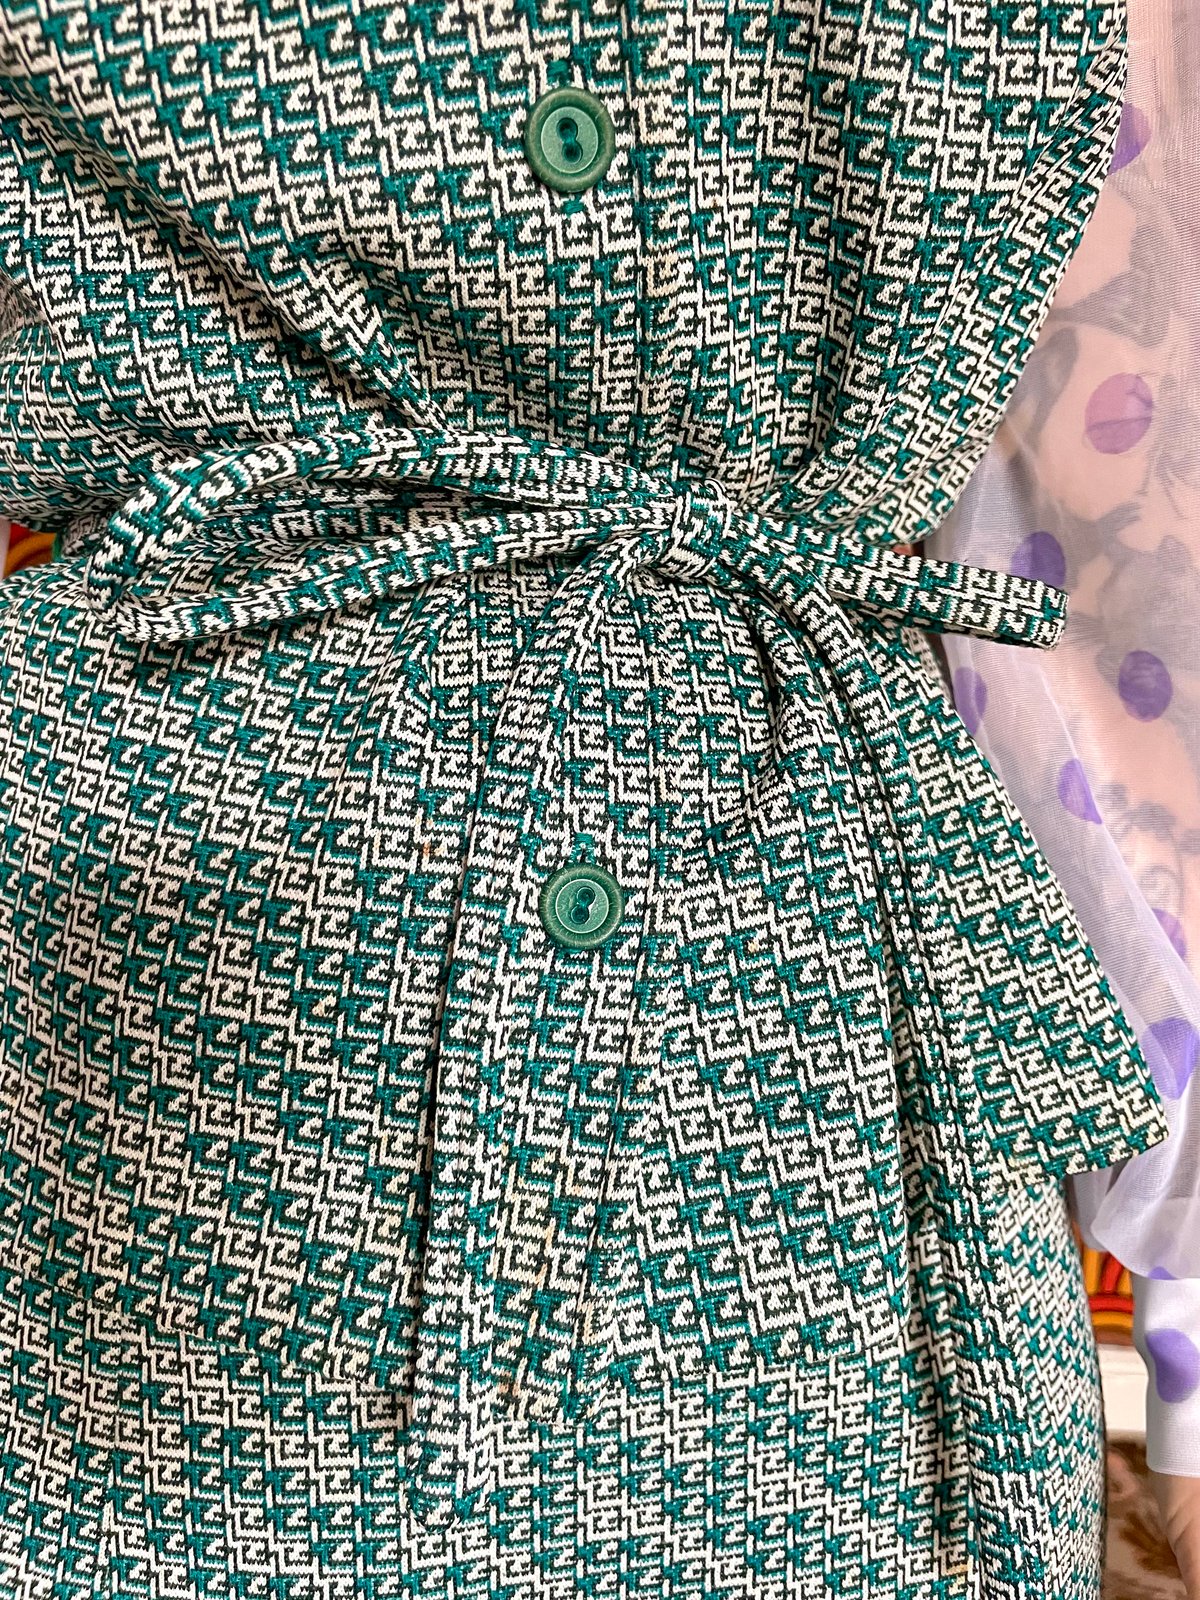 Vintage 70s Turquoise Skirt and Waistcoat Two Piece Suit